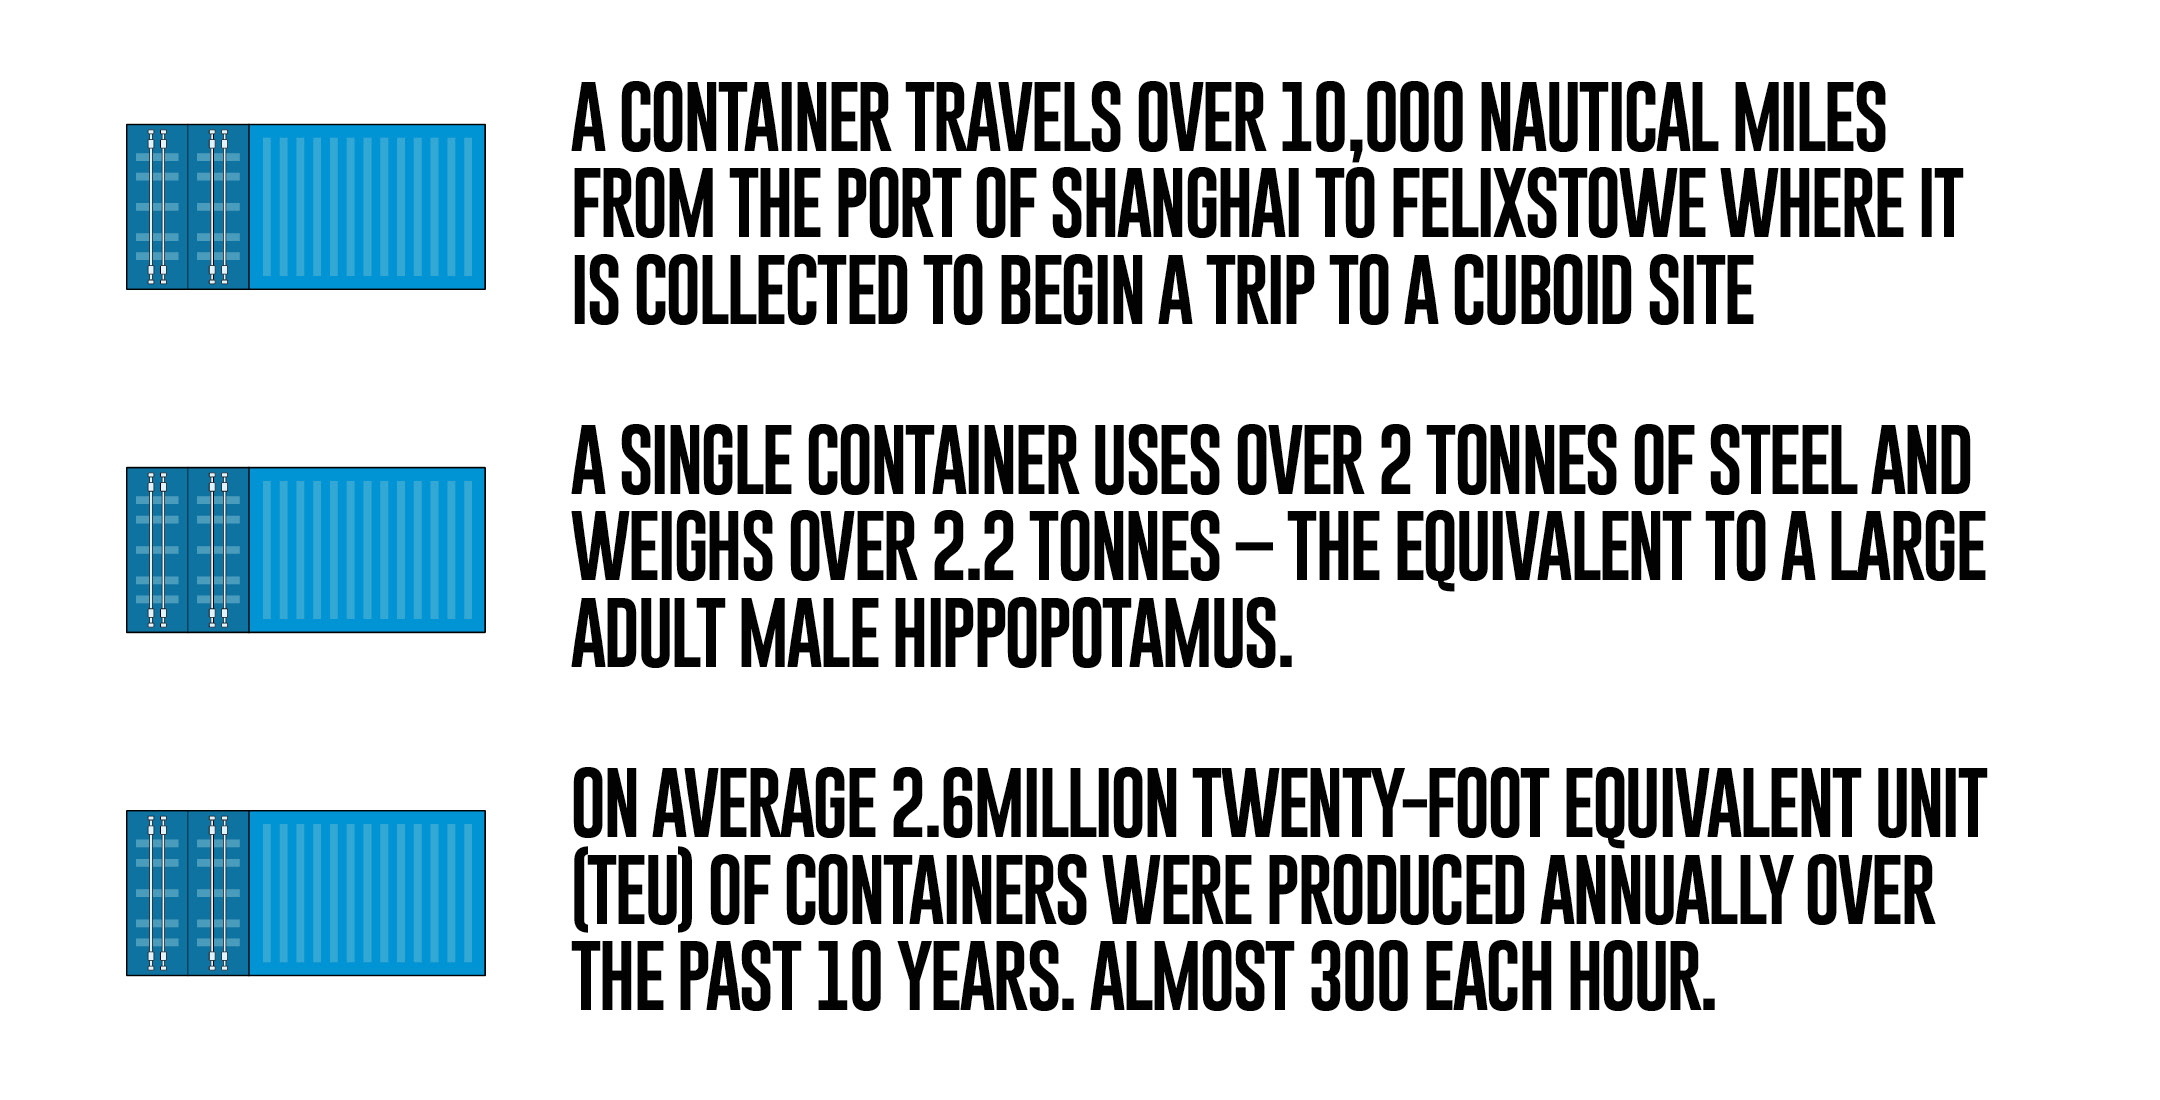 •	A container travels over 10,000 nautical miles from the port of Shanghai to Felixstowe where it is collected to begin a trip to a Cuboid Site •	A single container uses over 2 tonnes of steel and weighs over 2.2 tonnes – the equivalent to a large adult male hippopotamus. •	On average 2.6million Twenty-Foot Equivalent Unit (TEU) of containers were produced annually over the past 10 years. Almost 300 each hour. 